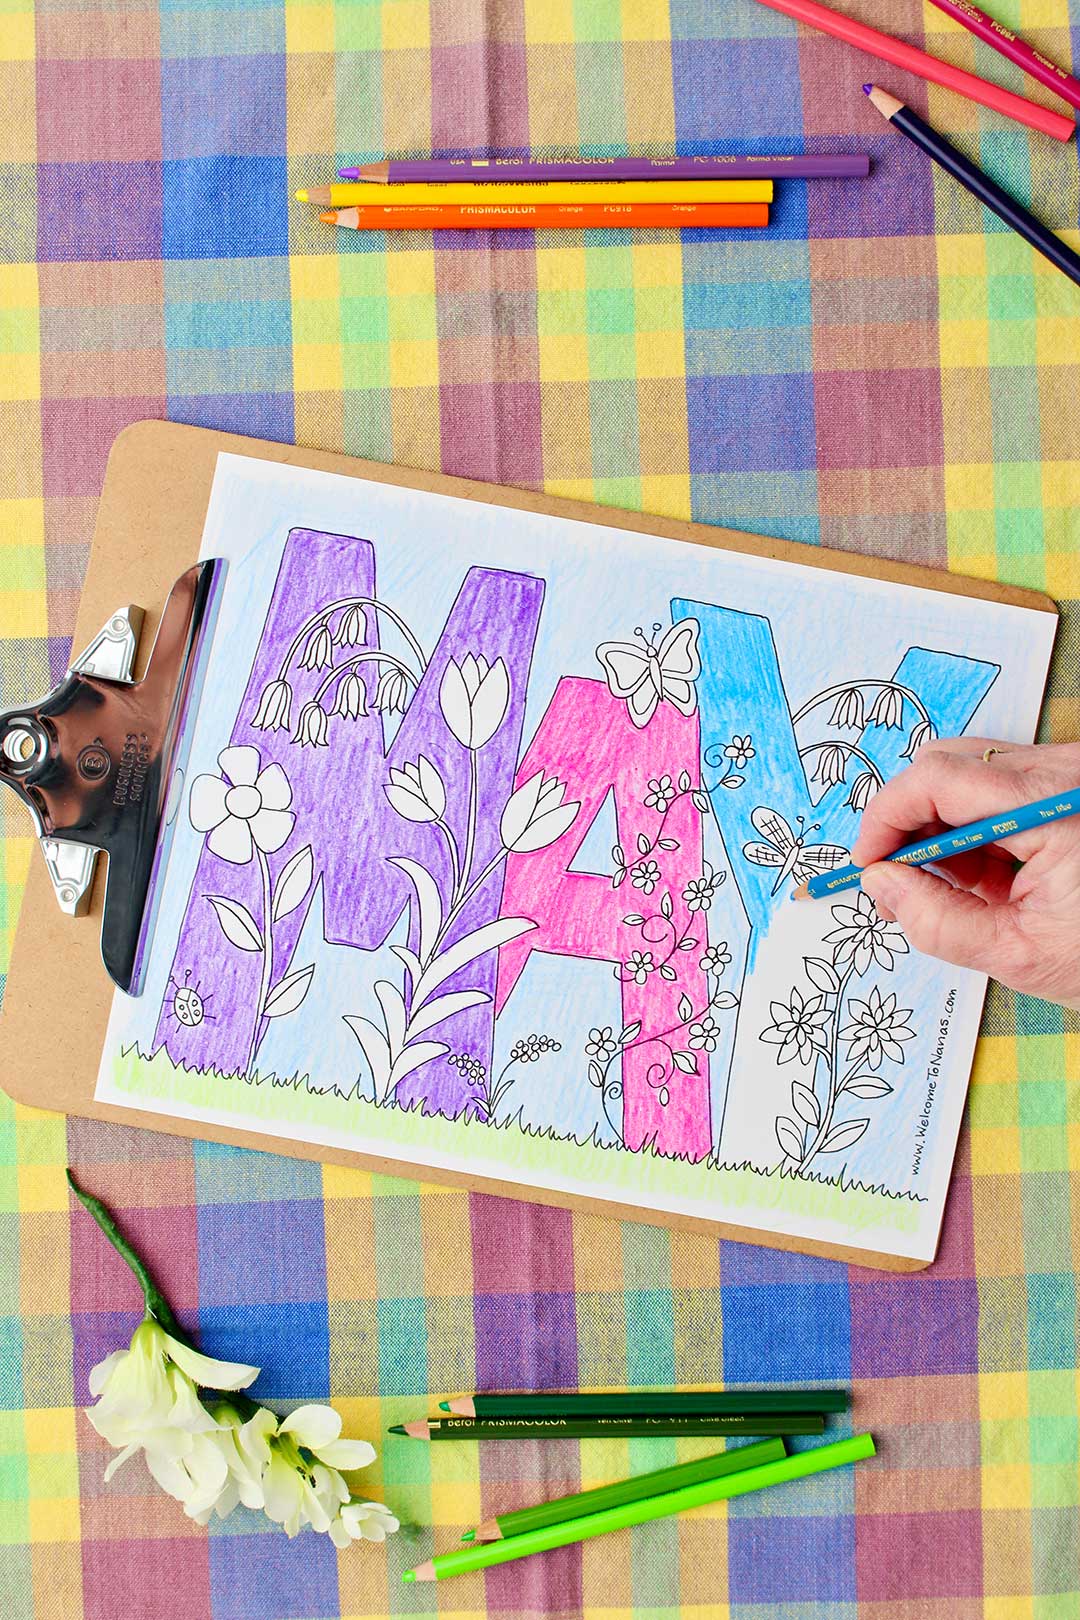 Hand coloring "Y" in blue in May Coloring Page with colored pencils resting on a colorful plaid background.